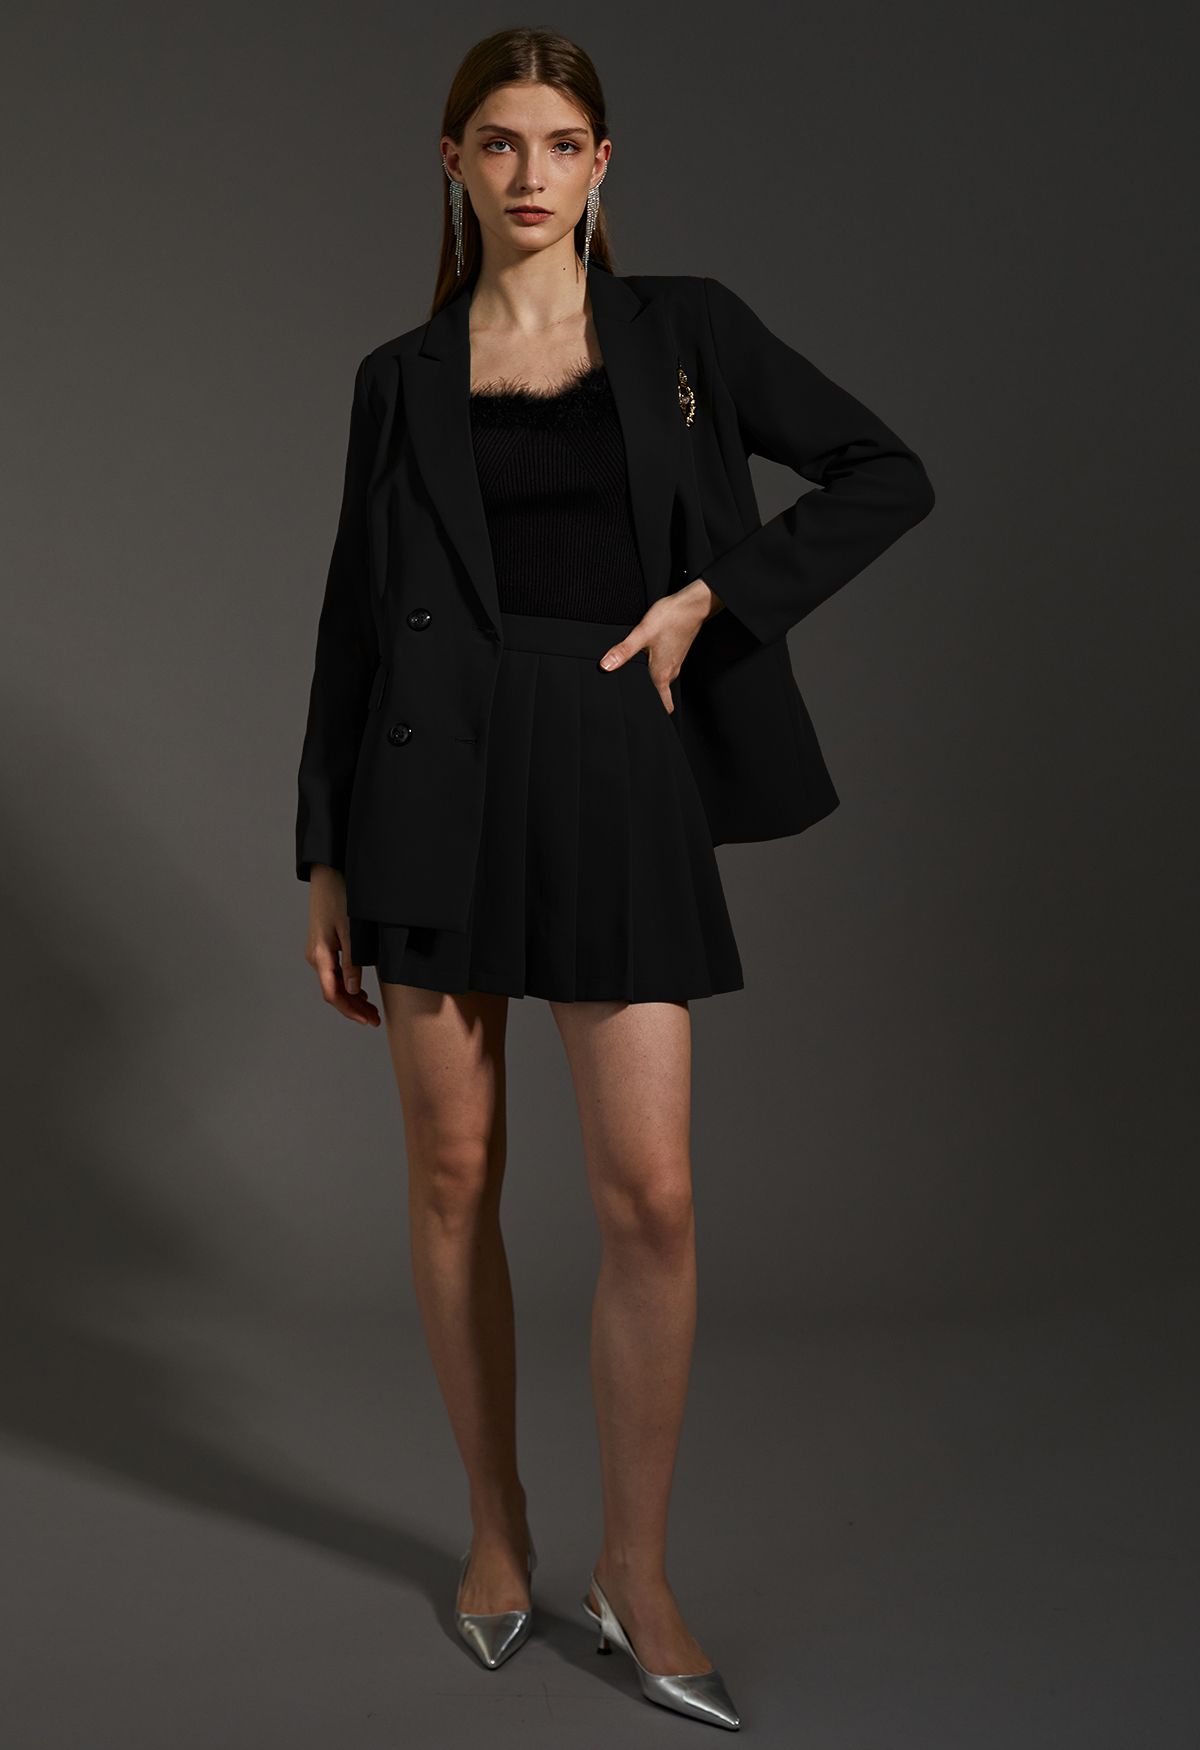 Bee Badge Solid Color Blazer and Skirt Set in Black - Retro, Indie and ...